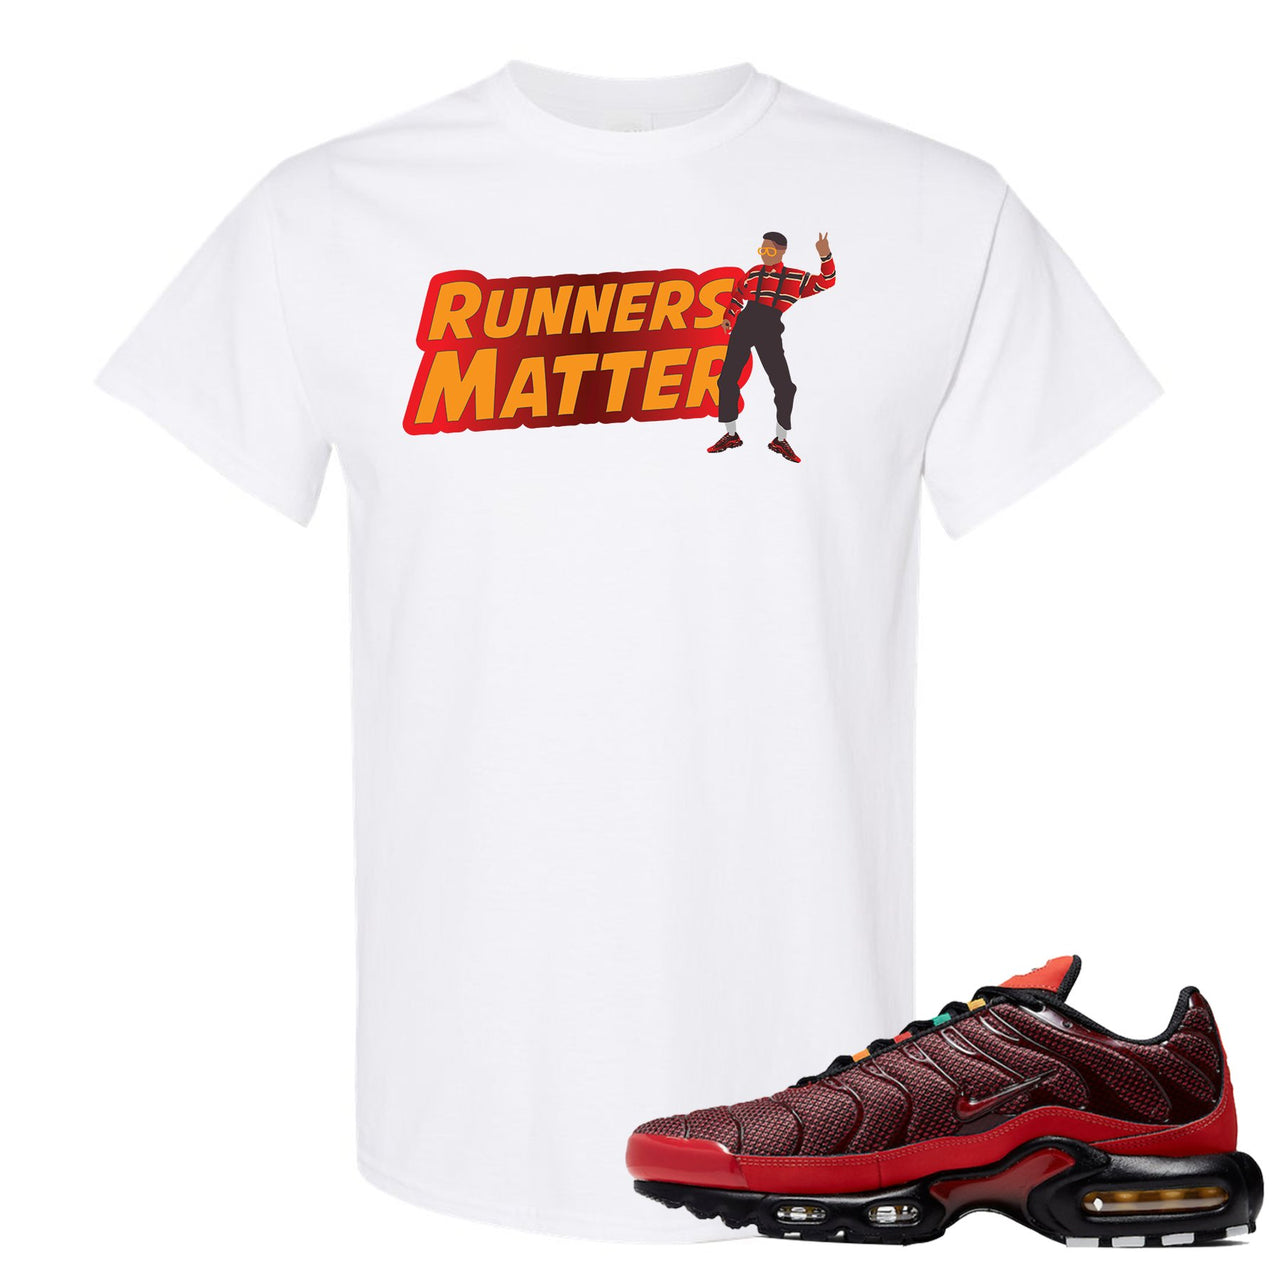 printed on the front of the air max plus sunburst sneaker matching white tee shirt is the runners matter logo